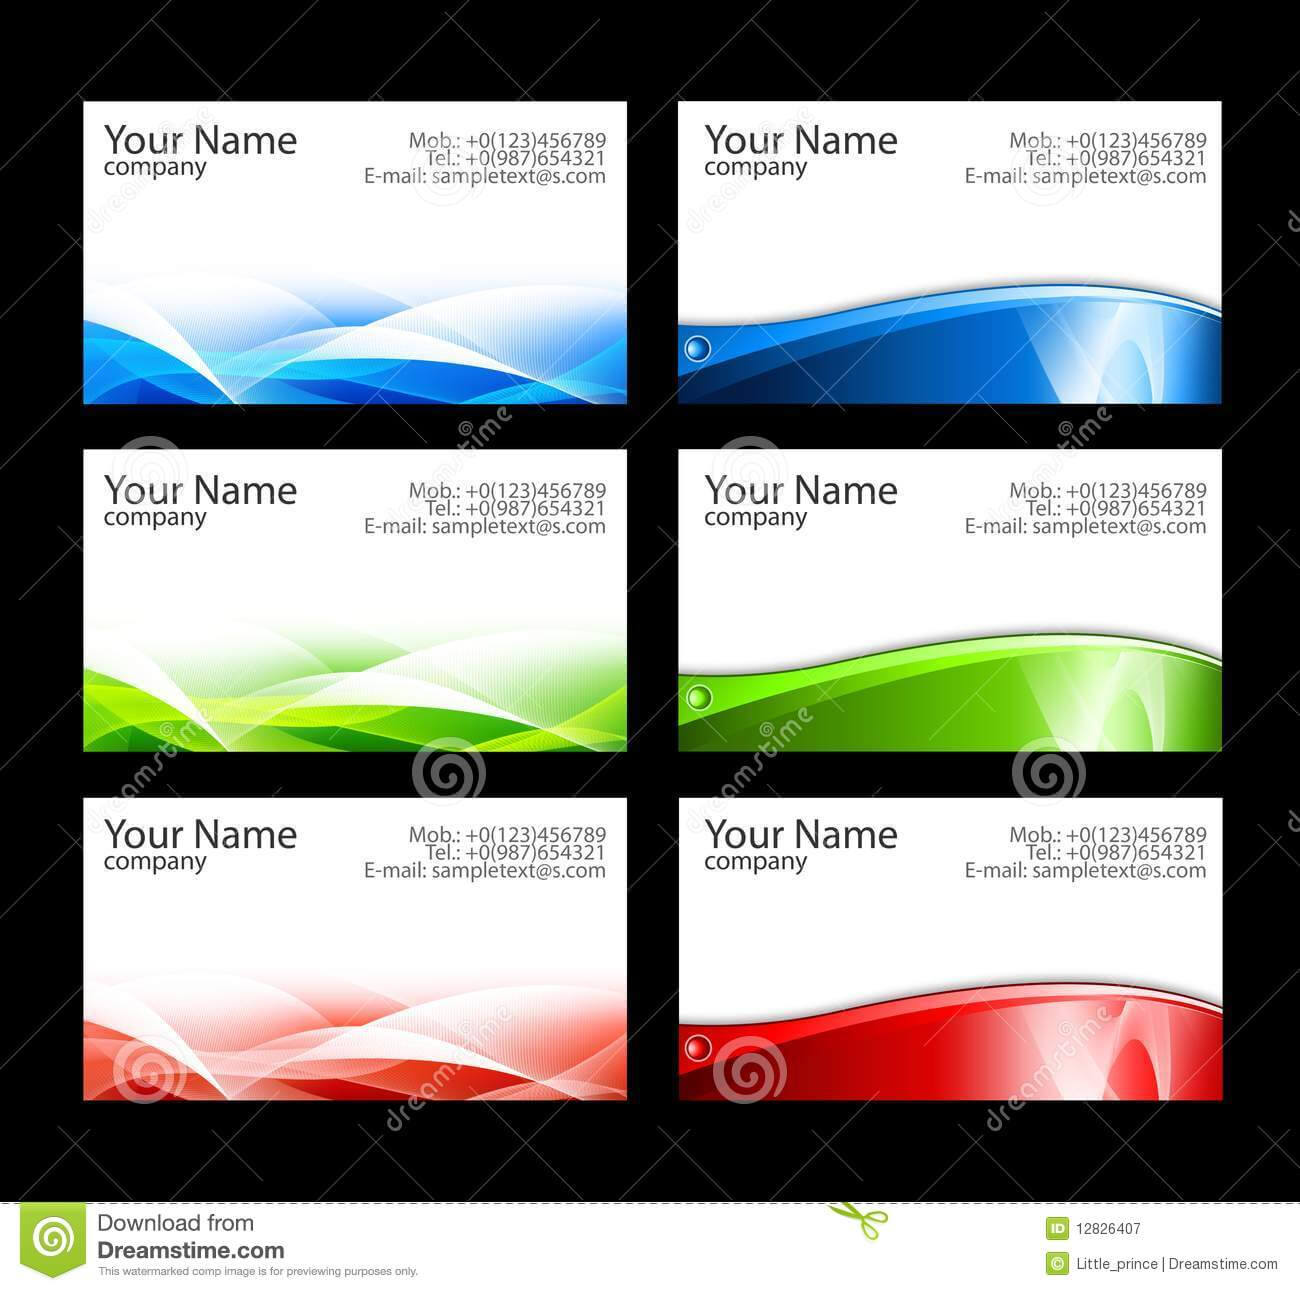 014 Template Ideas Business Cards Templates Free Wonderful With Regard To Templates For Visiting Cards Free Downloads